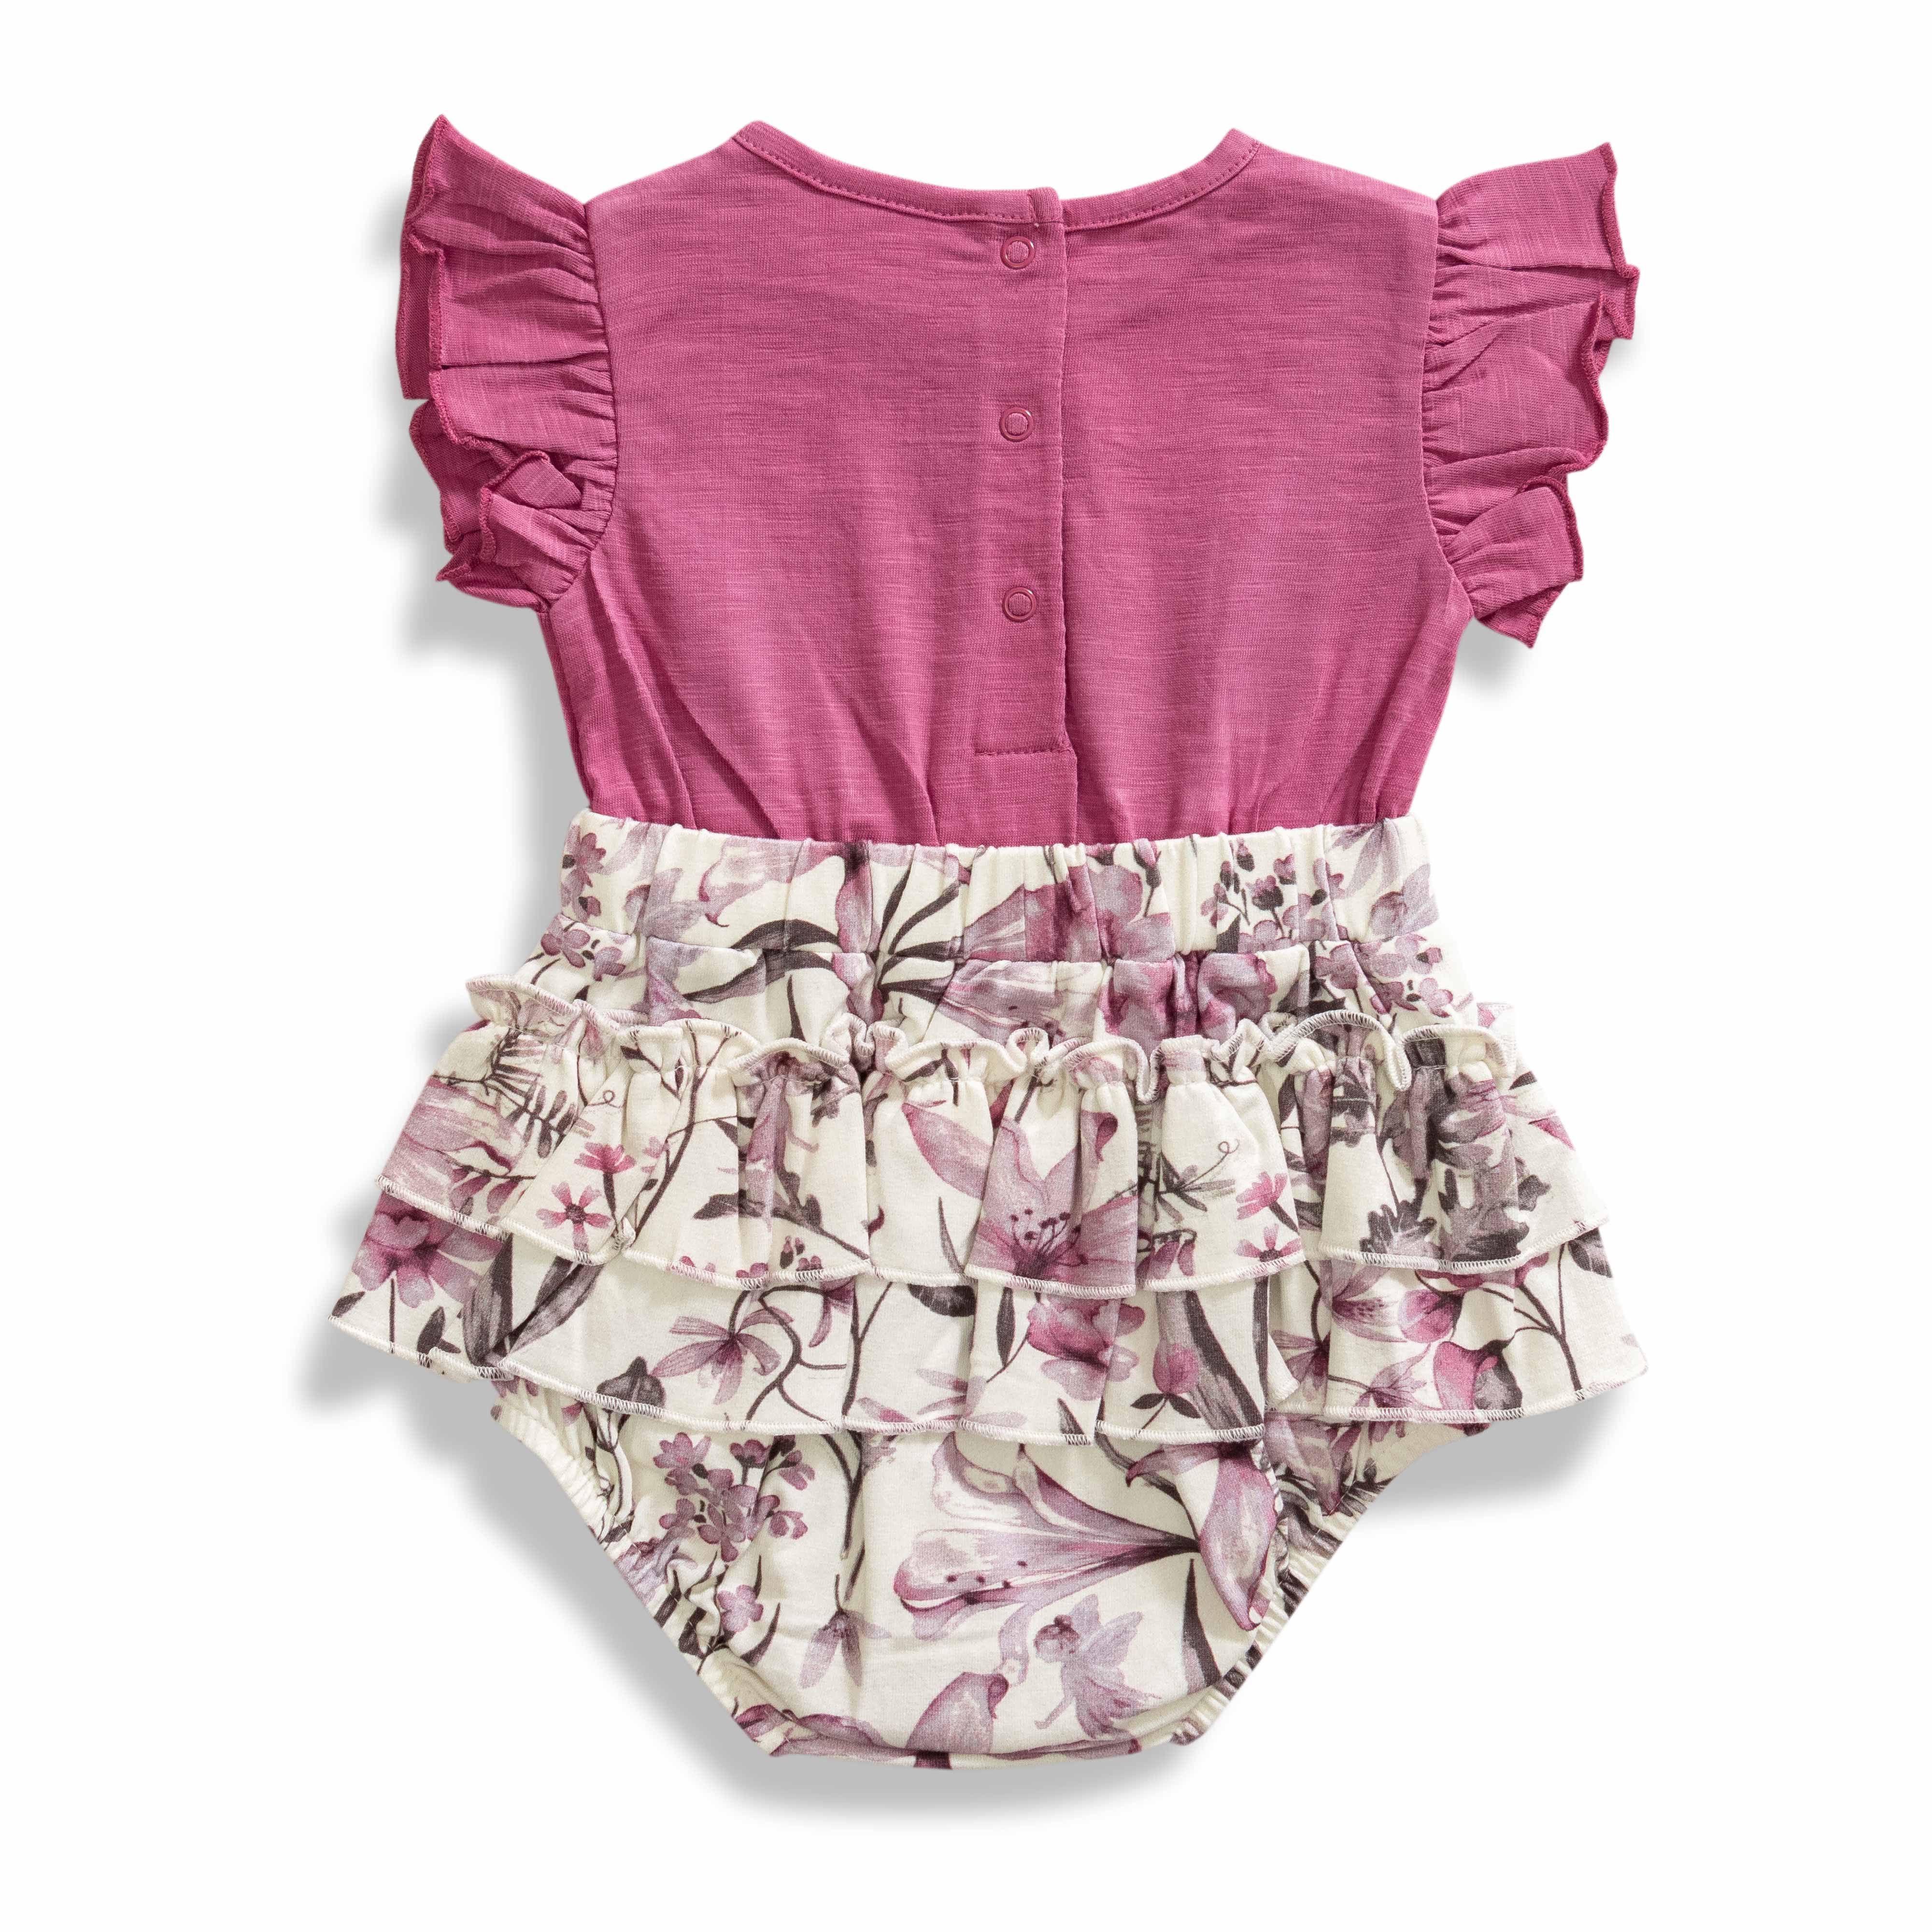 Baby Girls Solid & Printed Body Suit